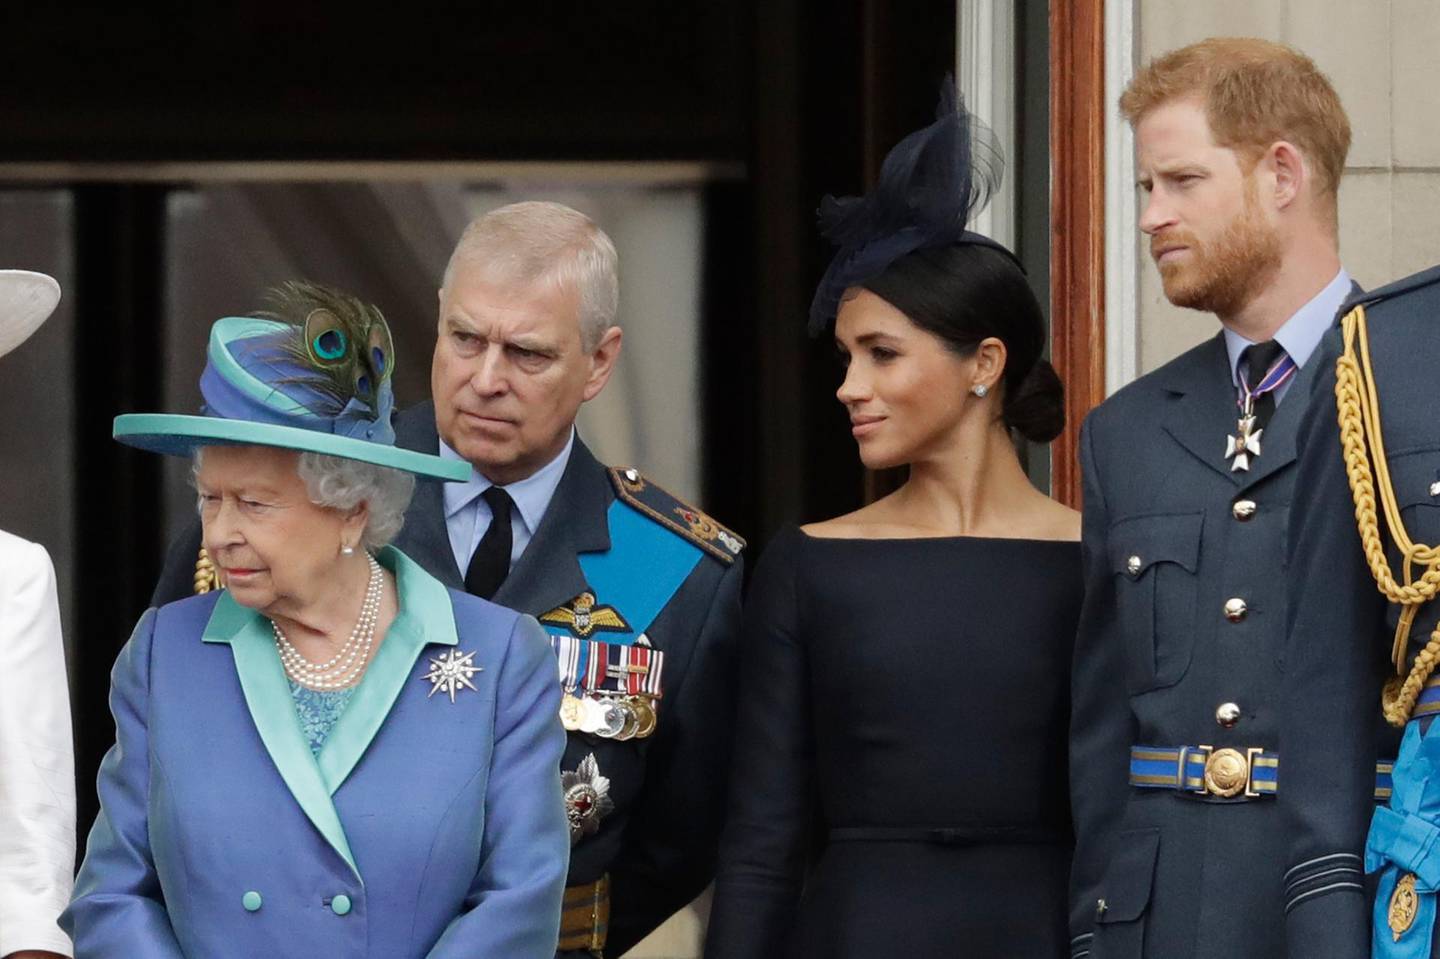 FILE - In this Tuesday, July 10, 2018 file photo Britain's Queen Elizabeth II, Prince Andrew, Meghan the Duchess of Sussex and Prince Harry stand on a balcony to watch a flypast of Royal Air Force aircraft pass over Buckingham Palace in London. As part of a surprise announcement distancing themselves from the British royal family, Prince Harry and his wife Meghan declared they will "work to become financially independent" _ a move that has not been clearly spelled out and could be fraught with obstacles. (AP Photo/Matt Dunham, File)